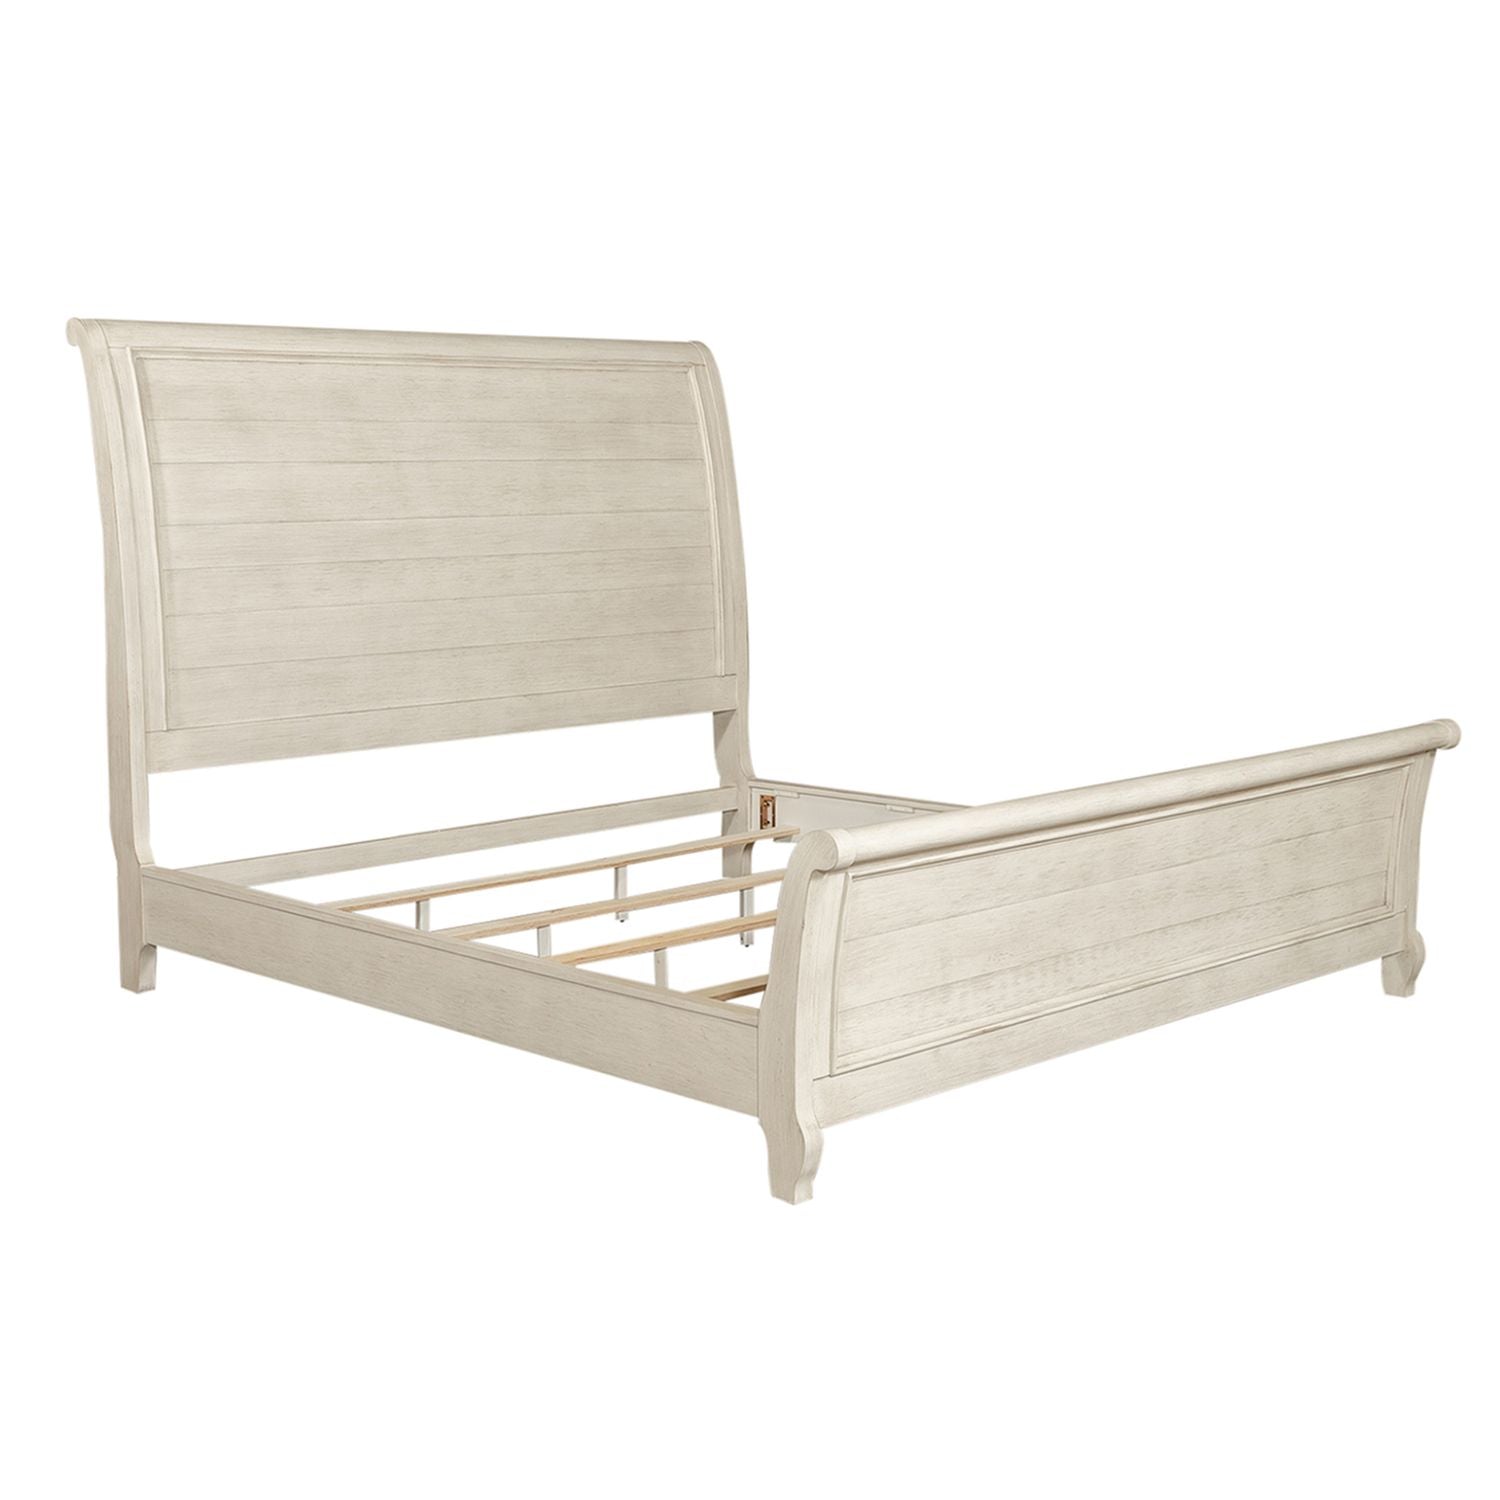 Farmhouse Reimagined 652-BR Sleigh Bedroom Collection from Liberty Furniture